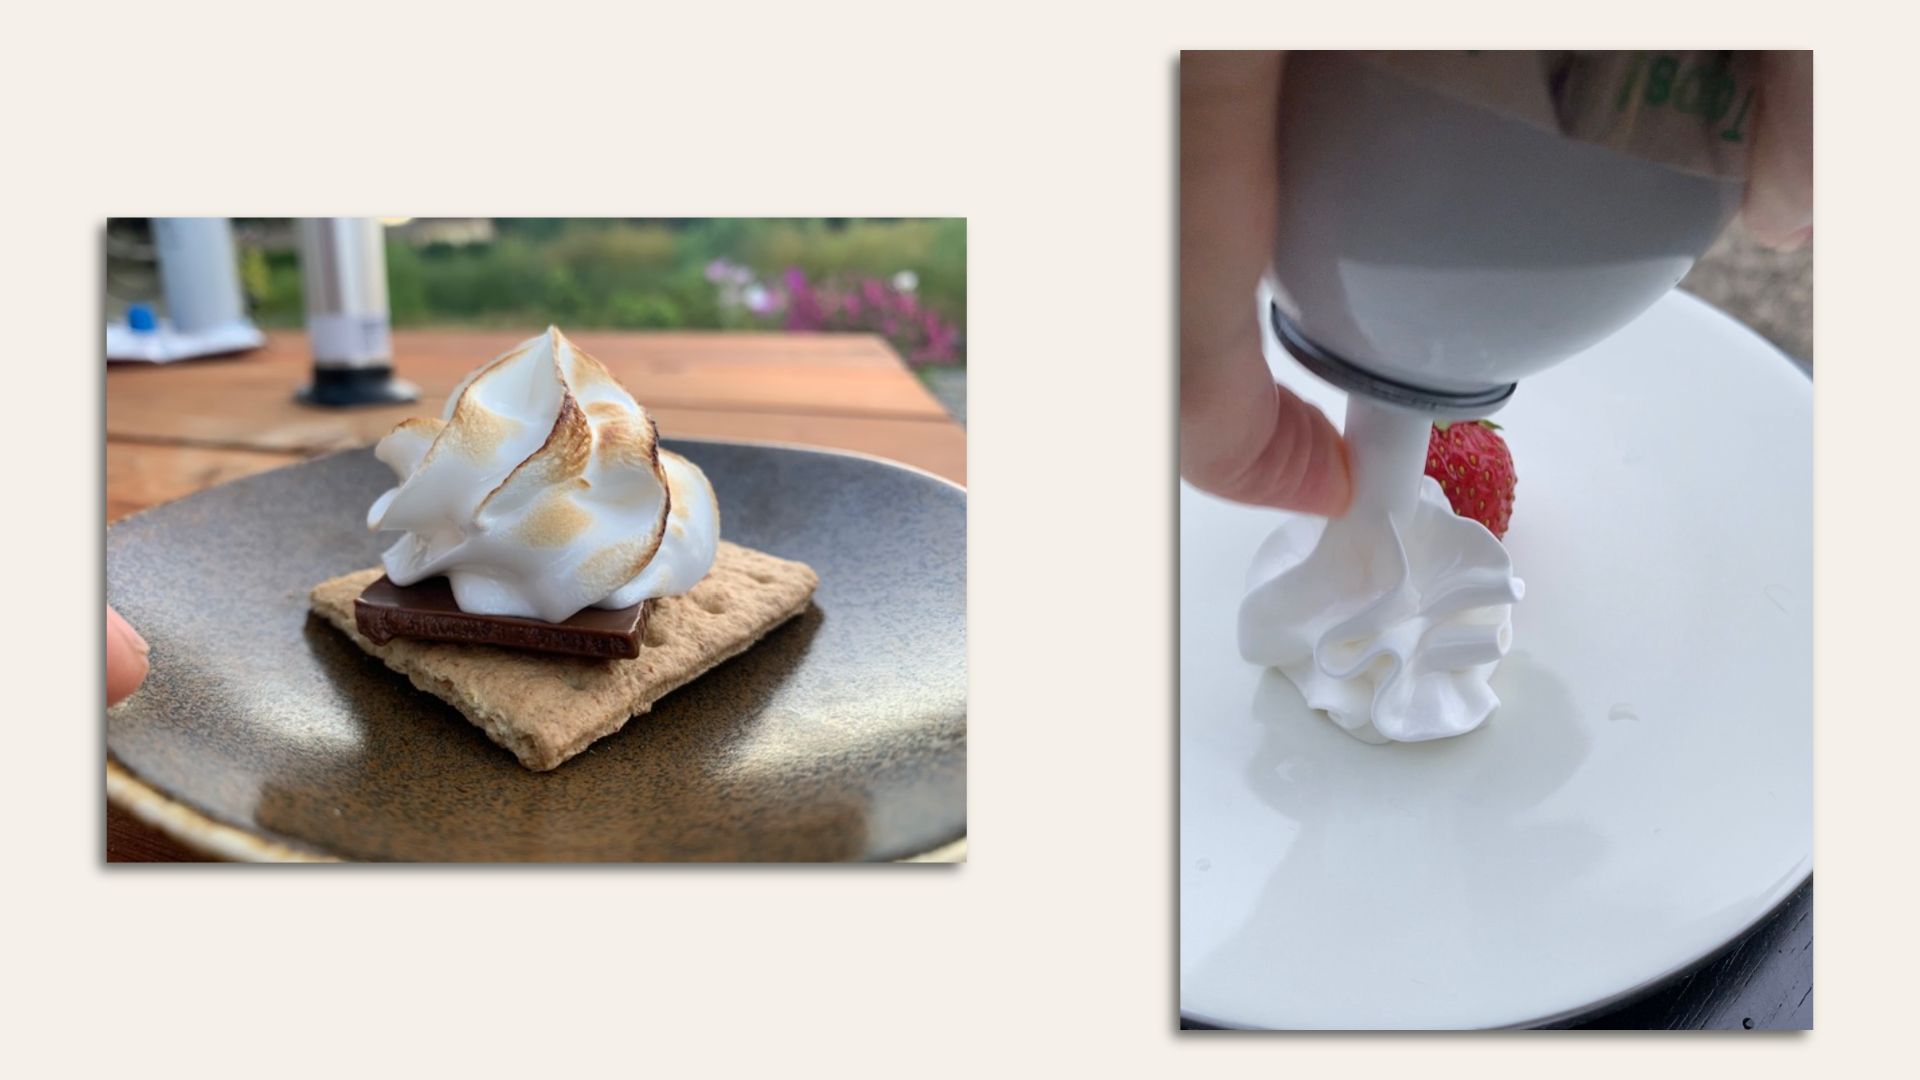 At left, a s'mores graham cracker with a whipped marshmallow topping; at right, a can dispenses the marshmallow onto a plate.